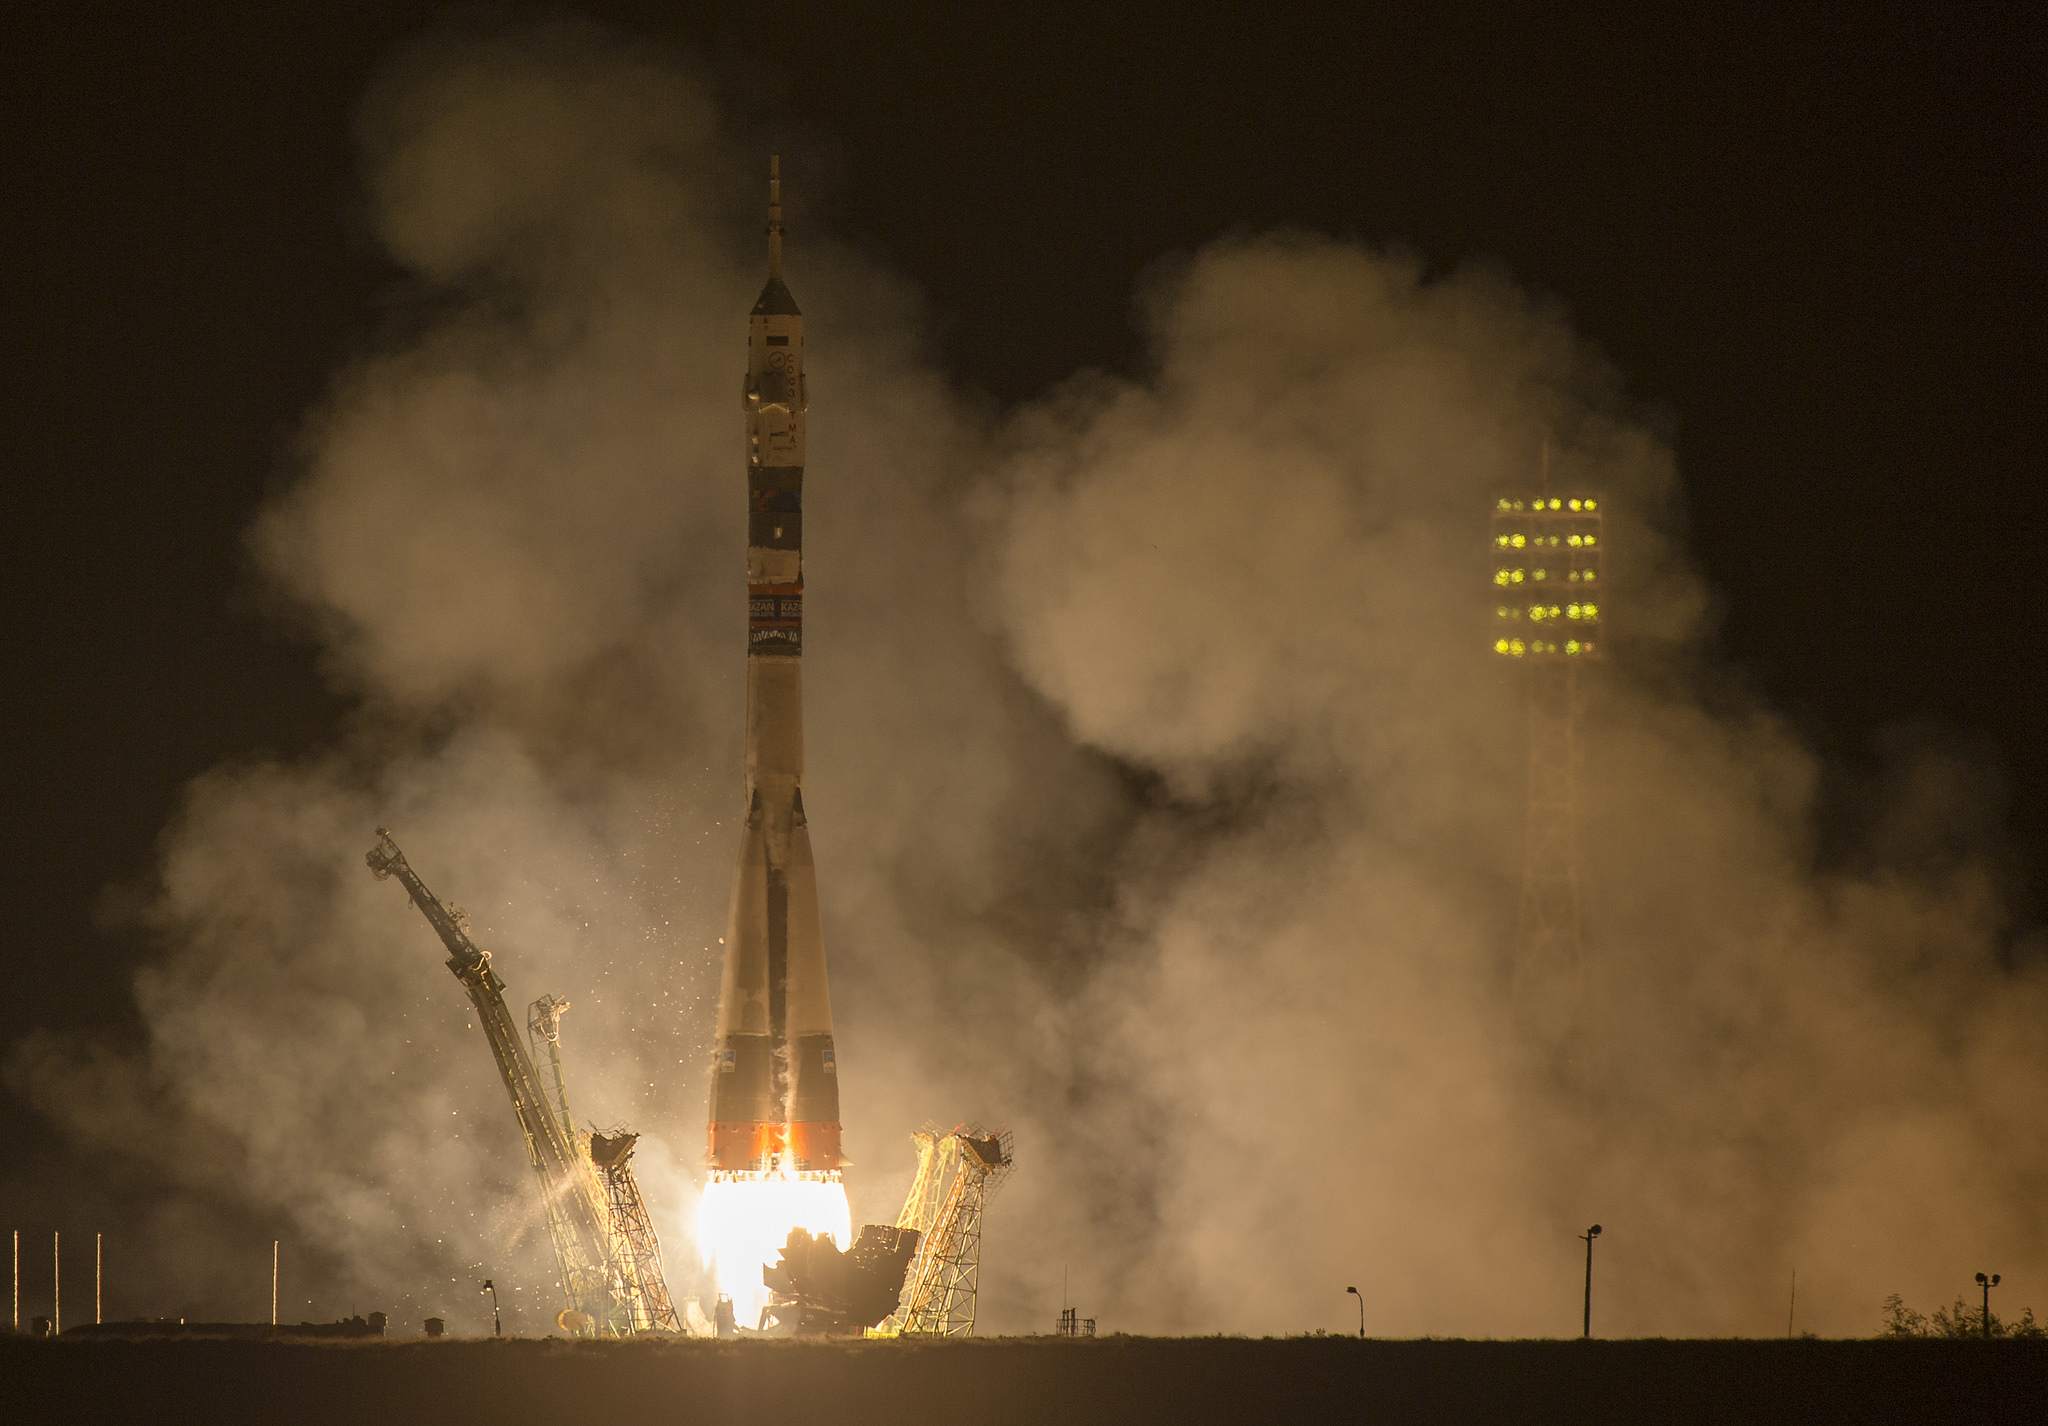 Soyuz TMA-14M takes flight at 2:25 a.m. local time Friday, 26 September (4:25 p.m. EDT Thursday, 25 September) from Site 1/5 at Baikonur Cosmodrome. Photo Credit: NASA